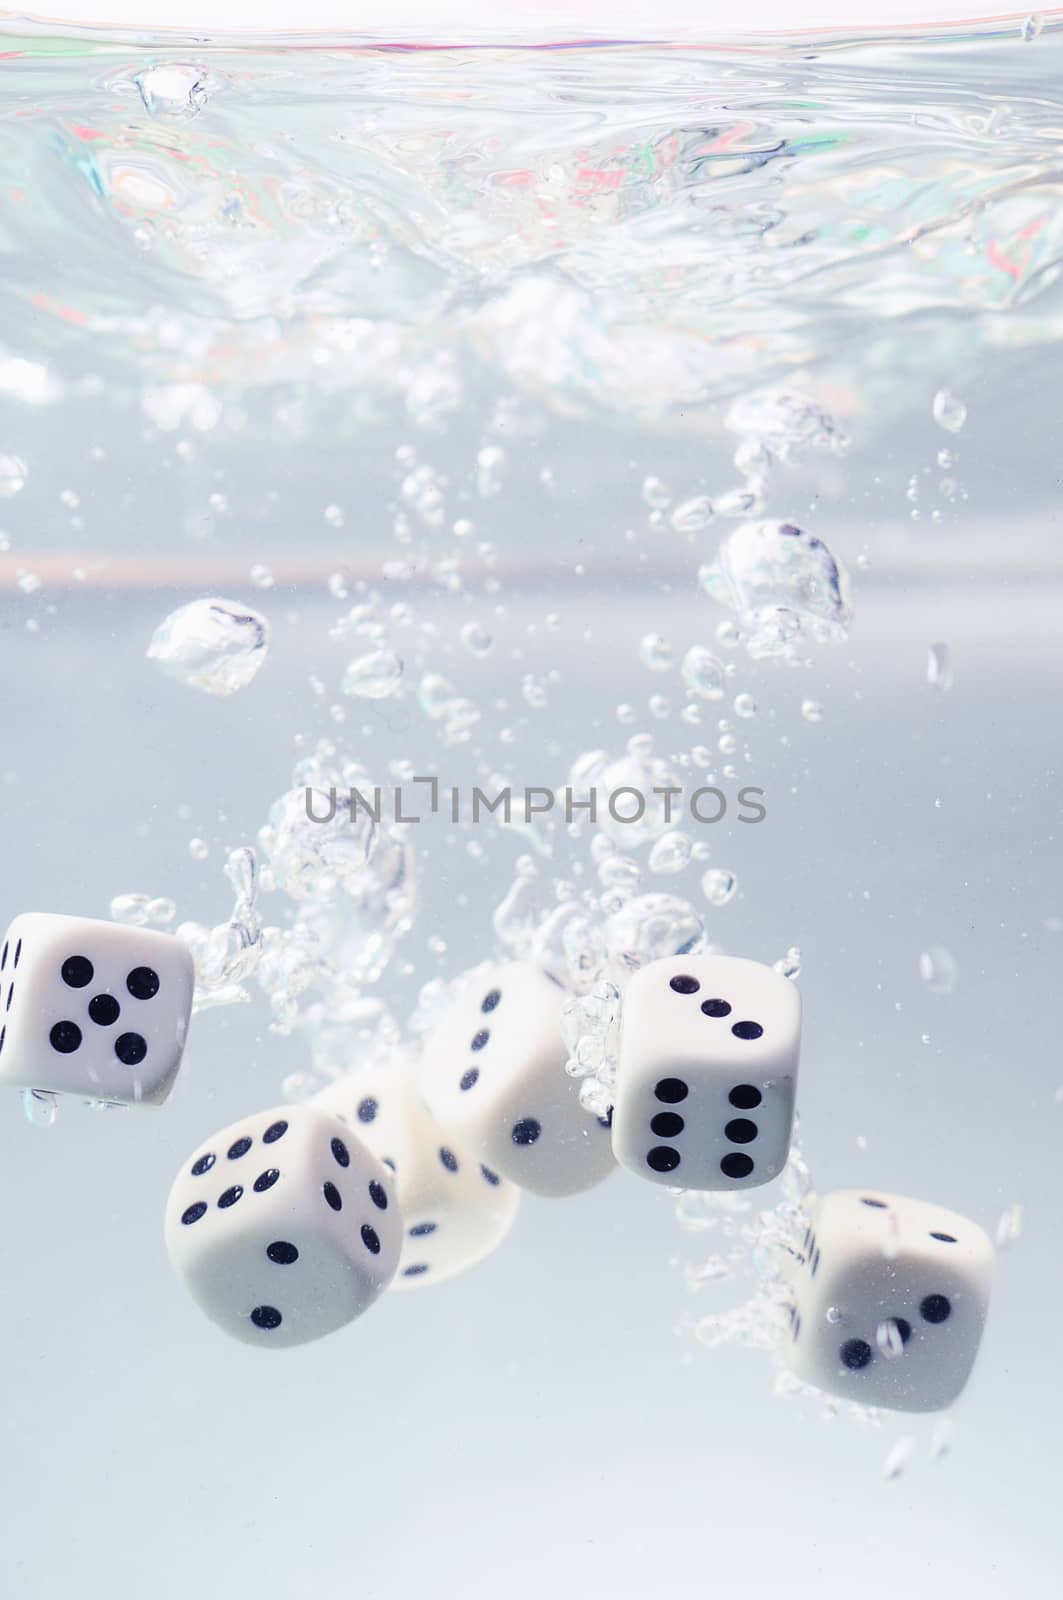 Dices under water